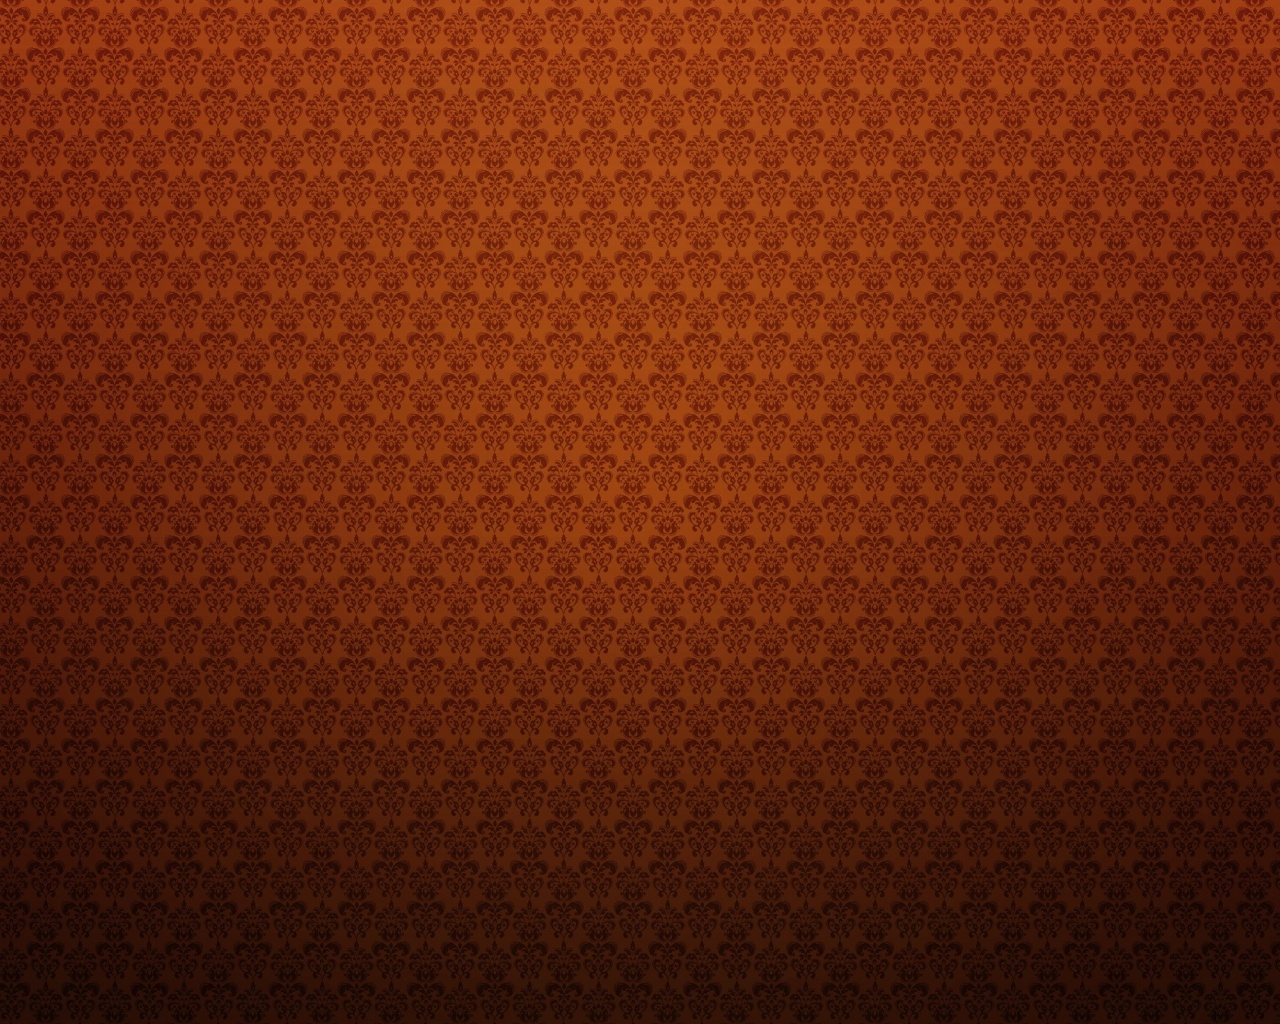 Patterns Light Colorful Texture Background